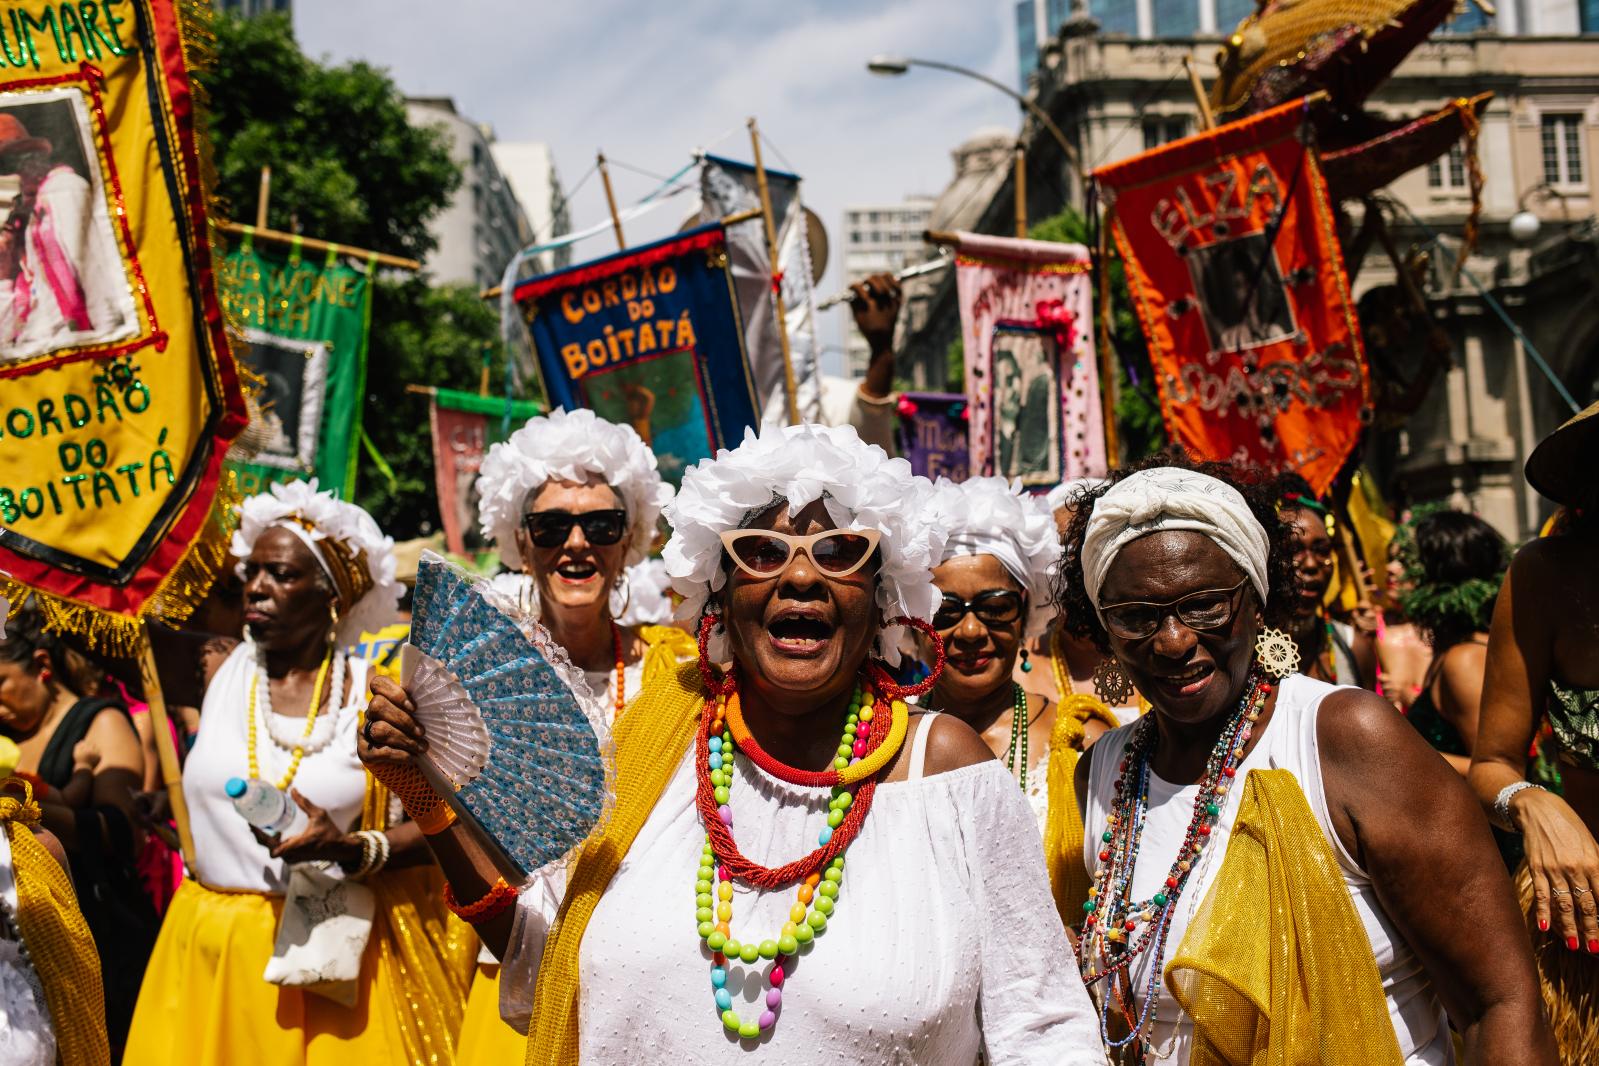 Members of the carnaval group C...rellaga for The New York Times.